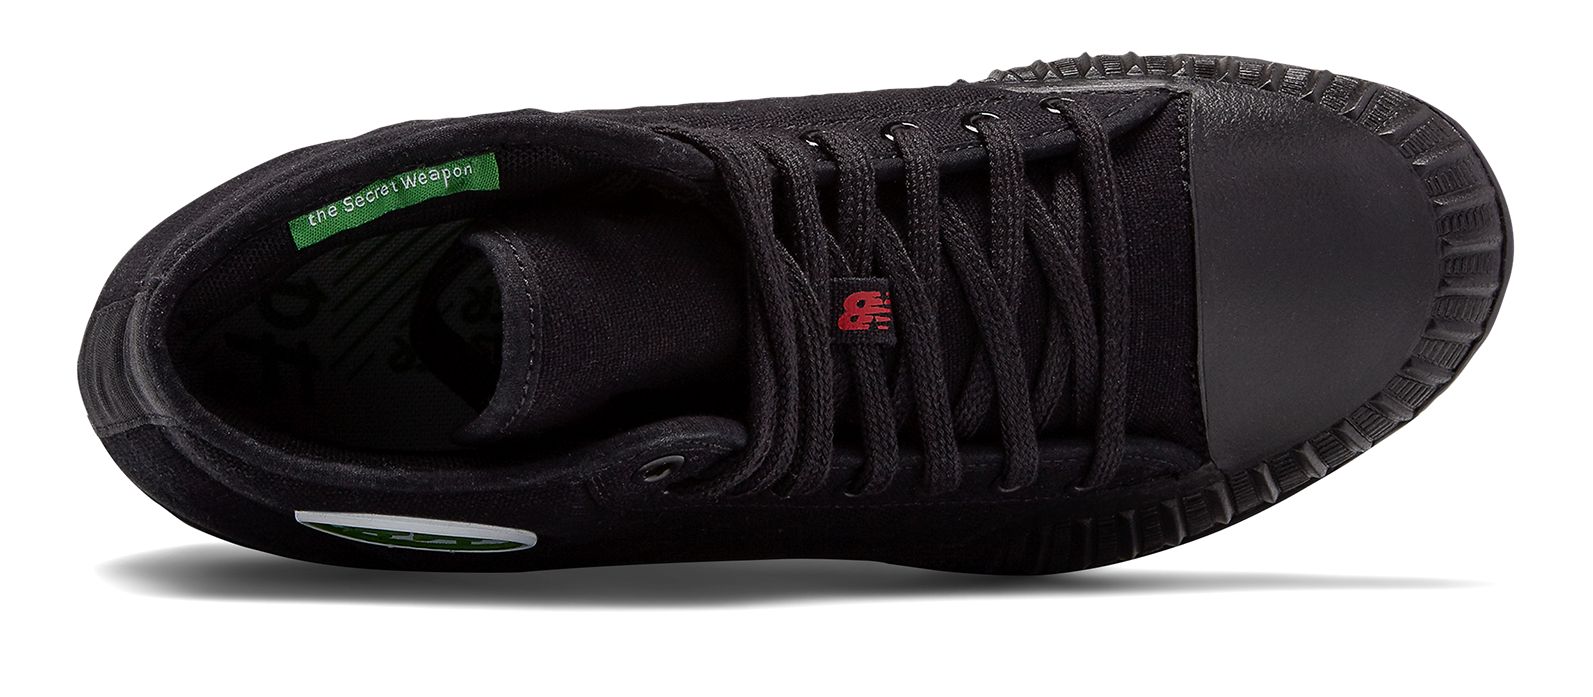 pf flyers molded cleats